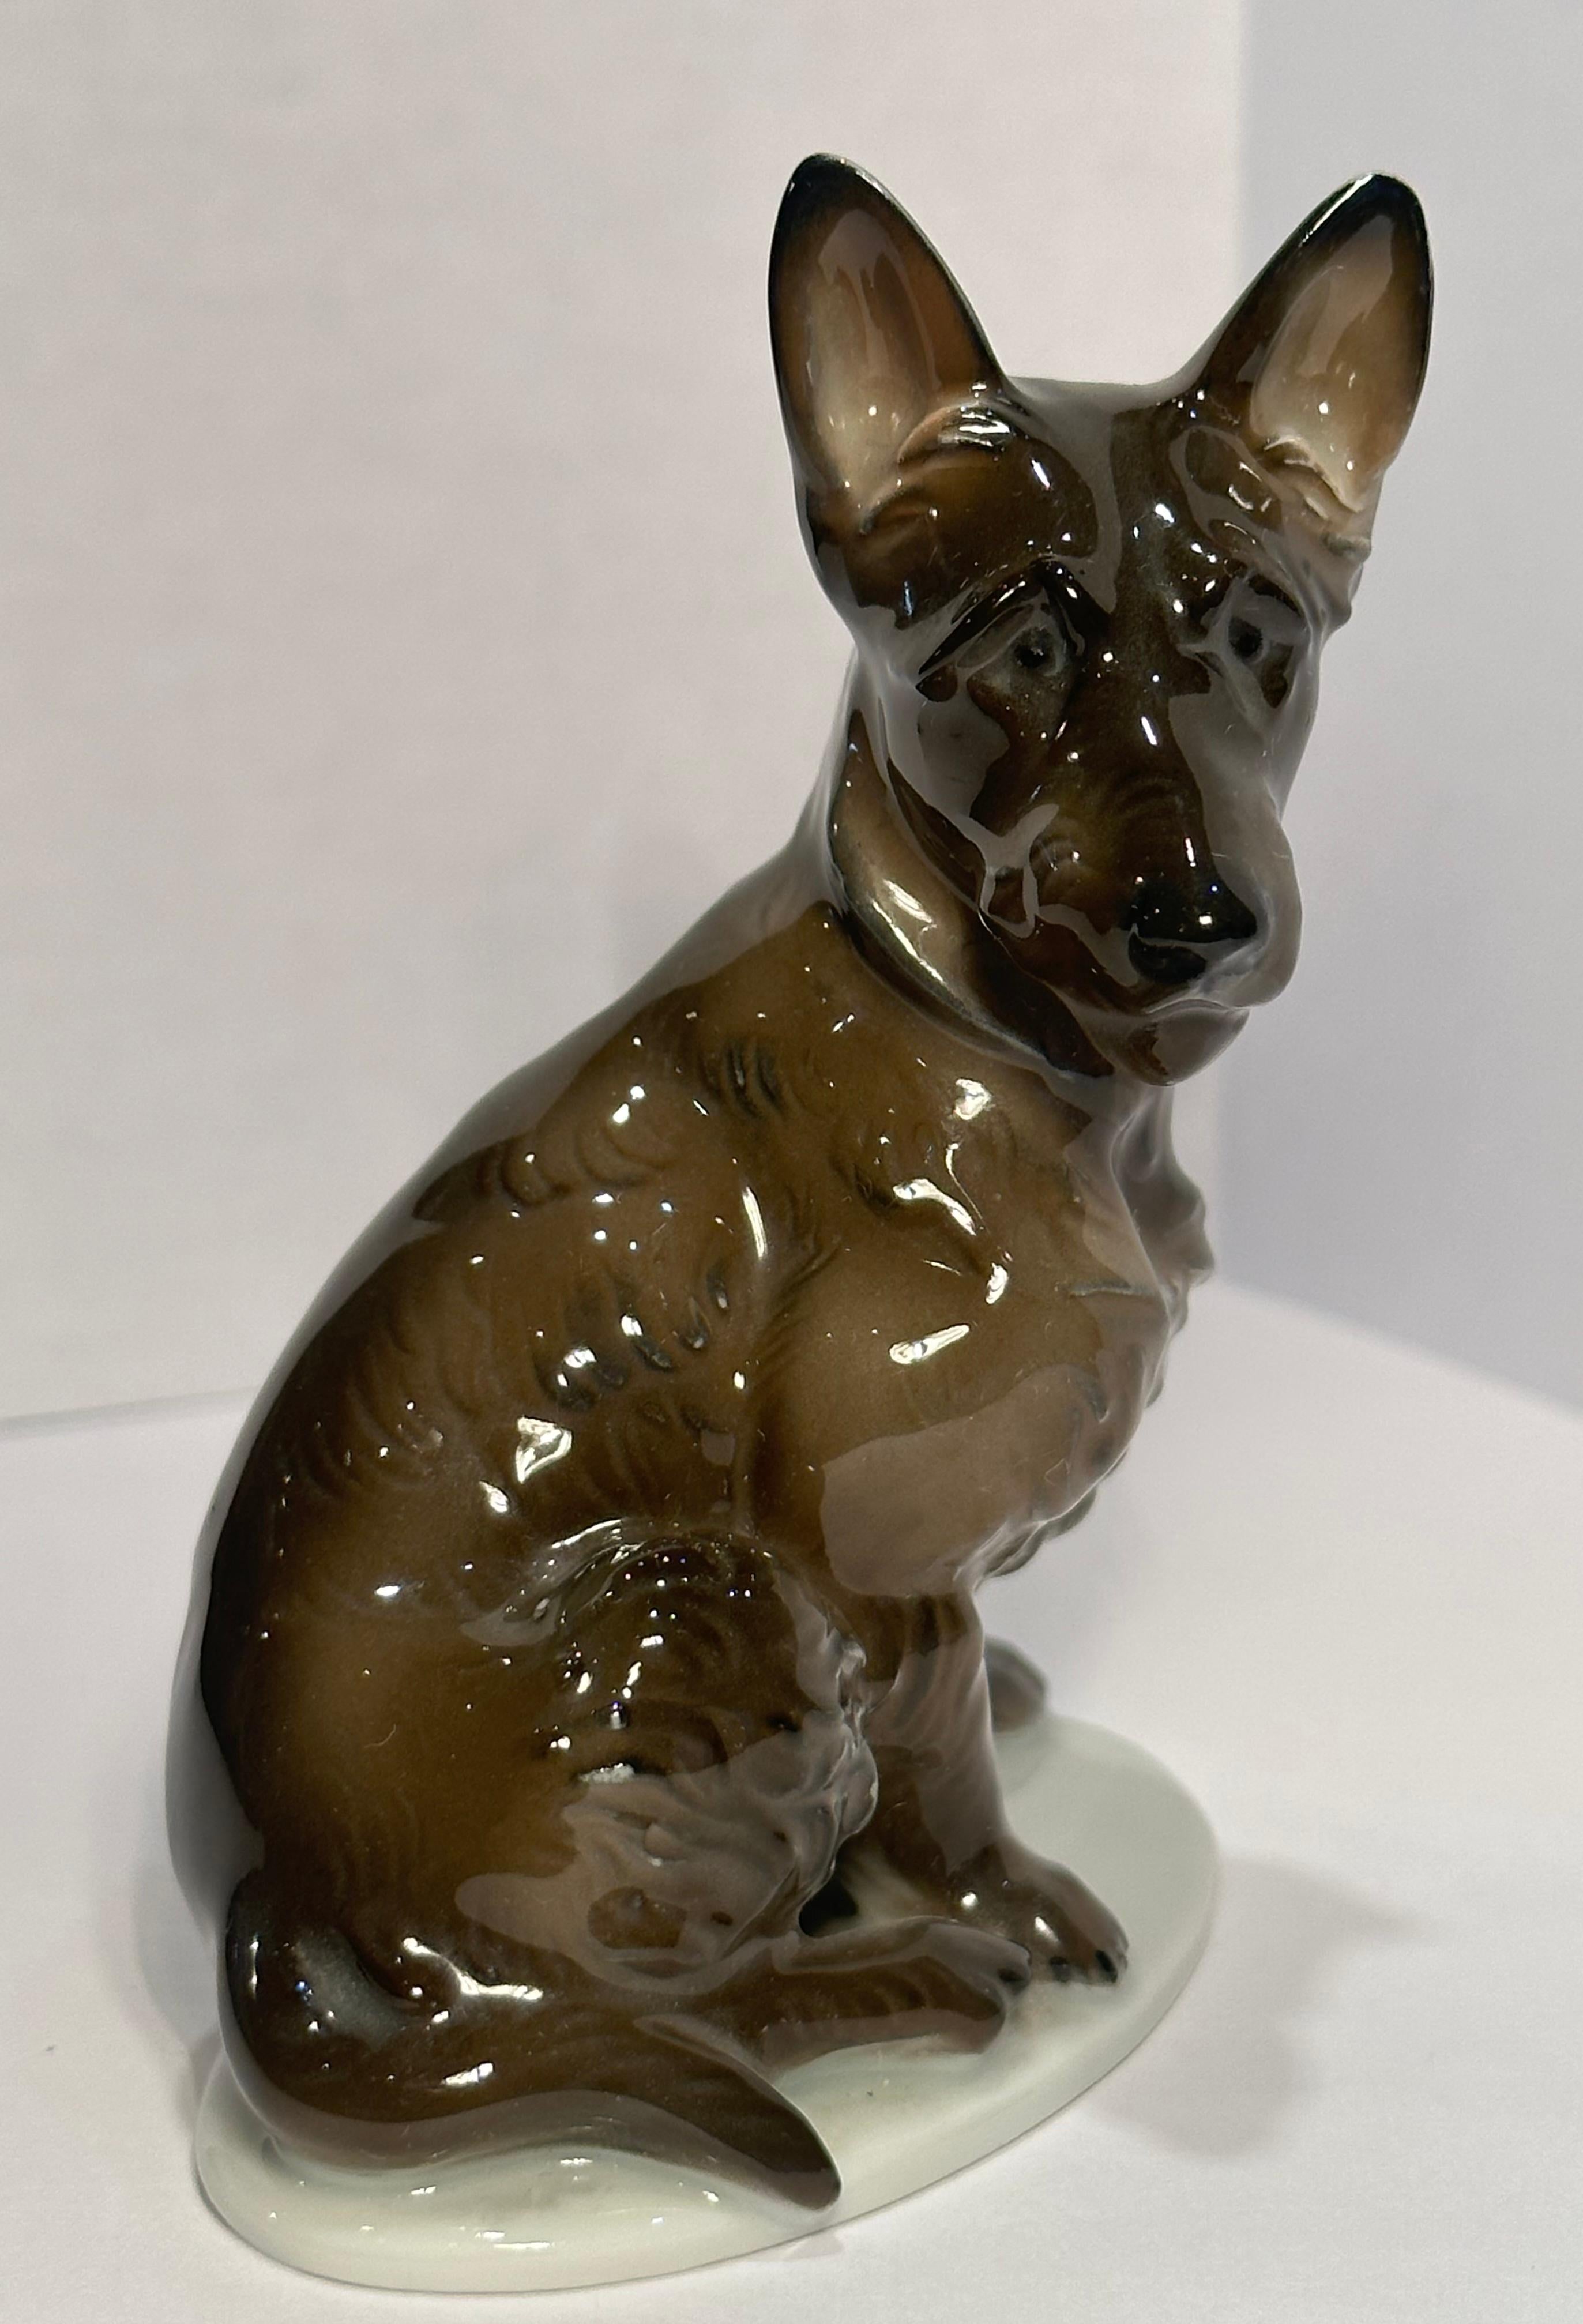 Quality Rare Rosenthal Bavaria German Shepherd Porcelain Dog Figurine Circa 1929 In Excellent Condition For Sale In Tustin, CA